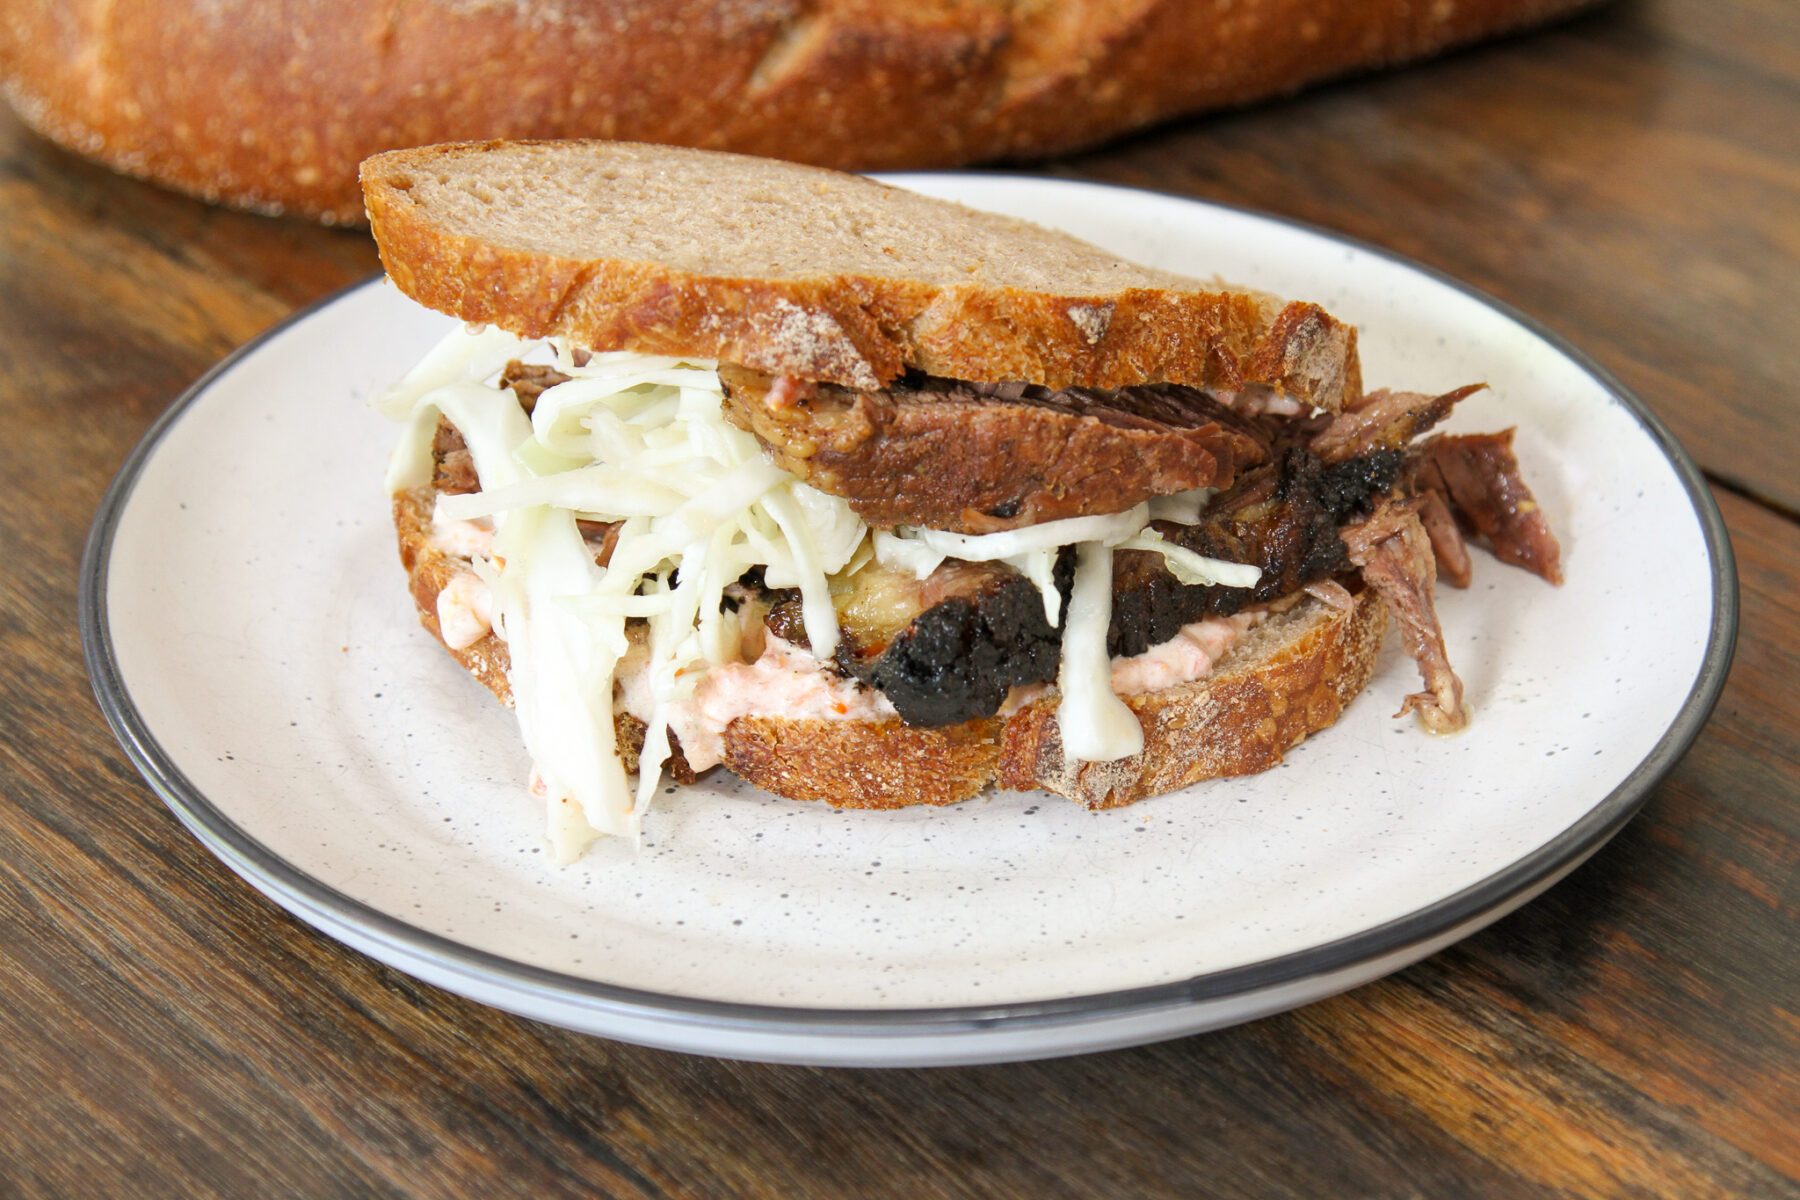 Slow cooked beef brisket shredded cabbage, tomato, mayo on New York Rye Sourdough